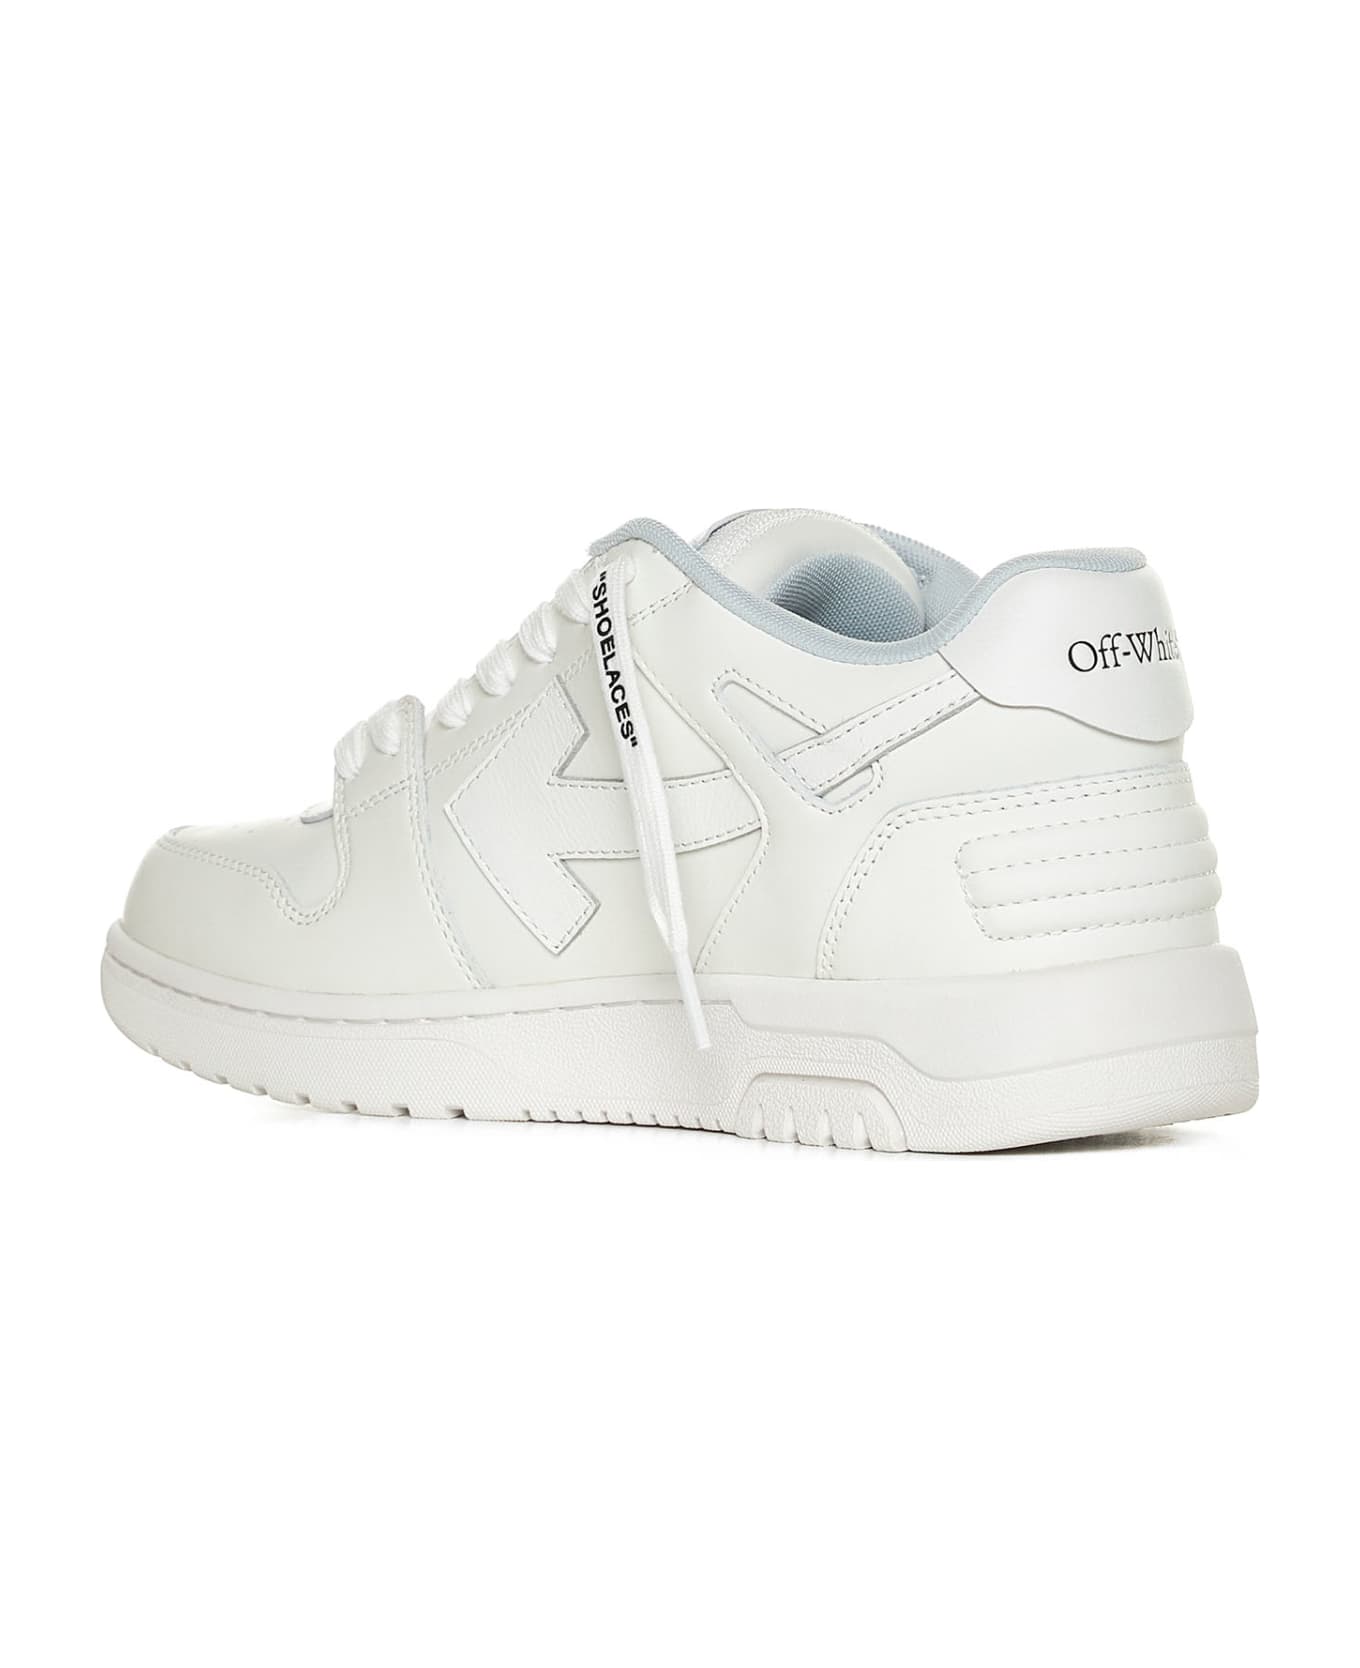 Off-White Out Of Office For Walking Sneakers - White BLACK スニーカー